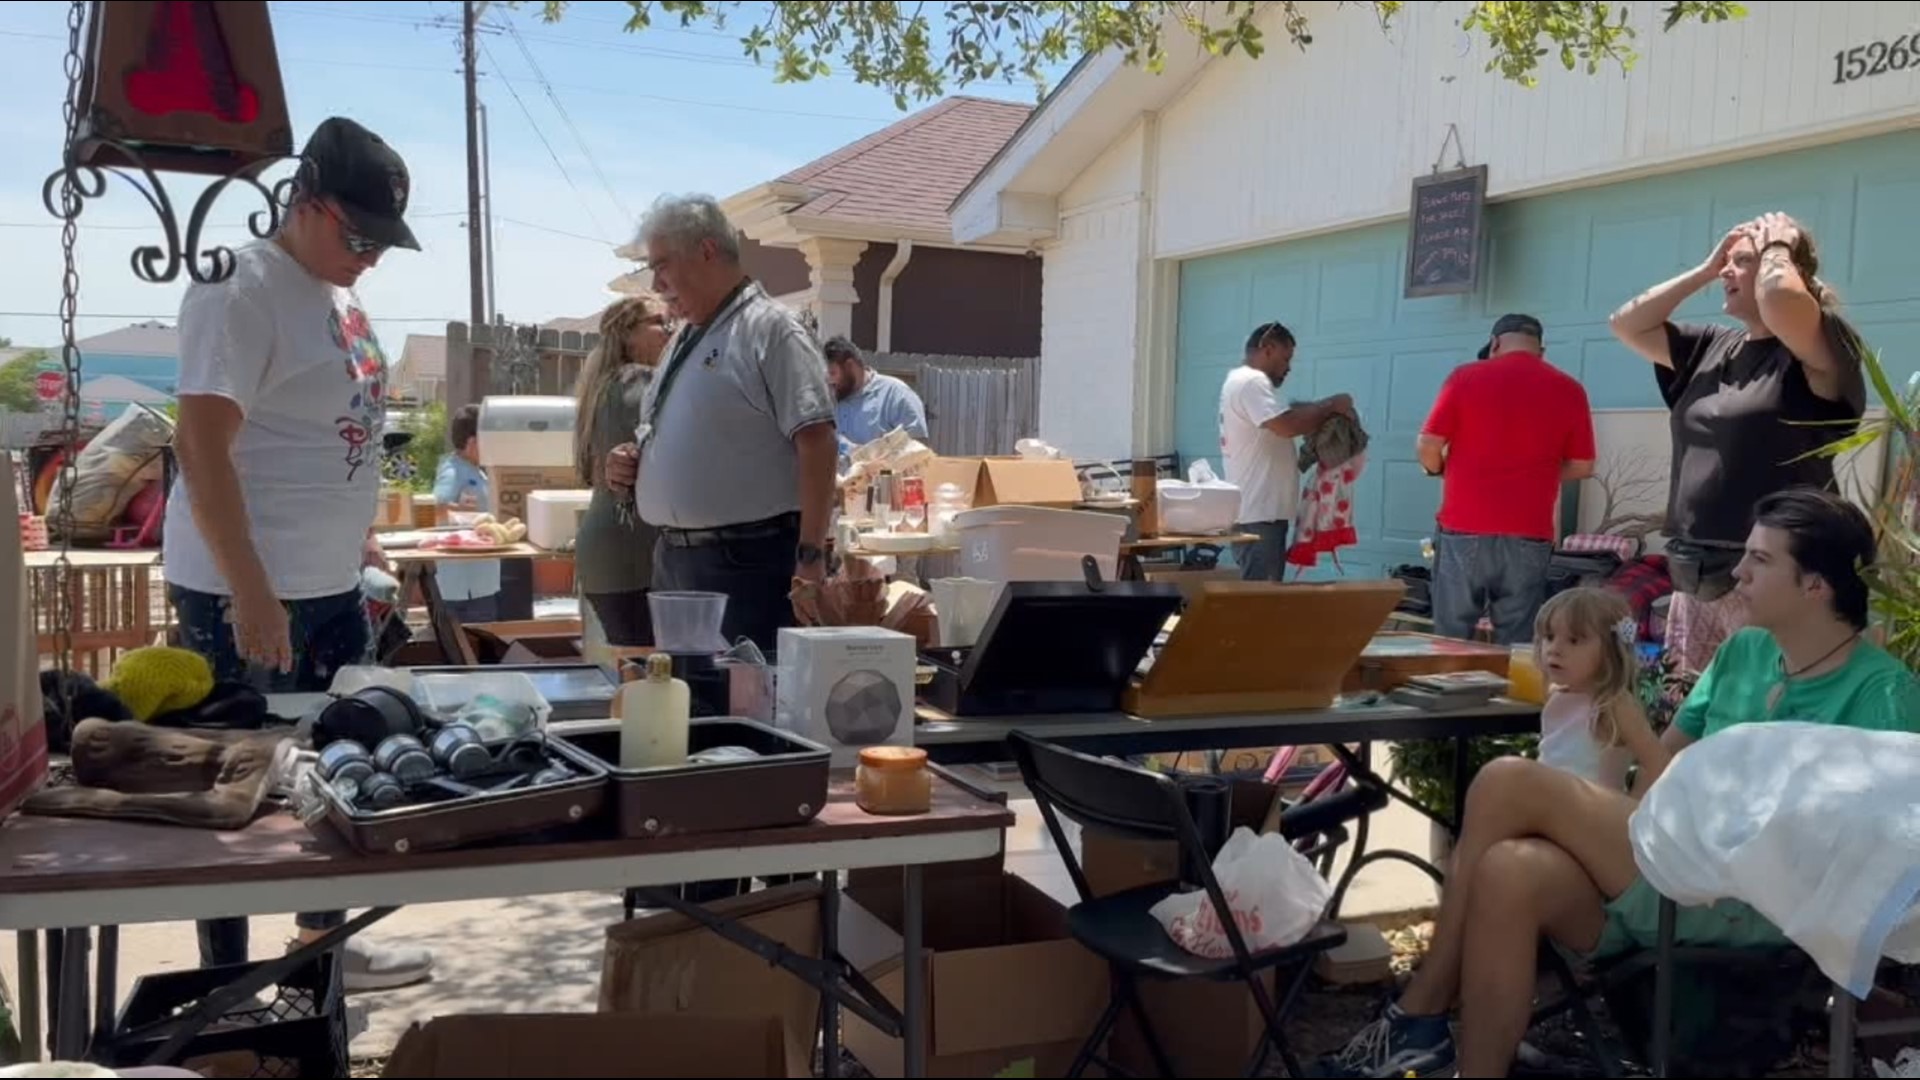 More than 80 streets participated in the massive community garage sale on Saturday.